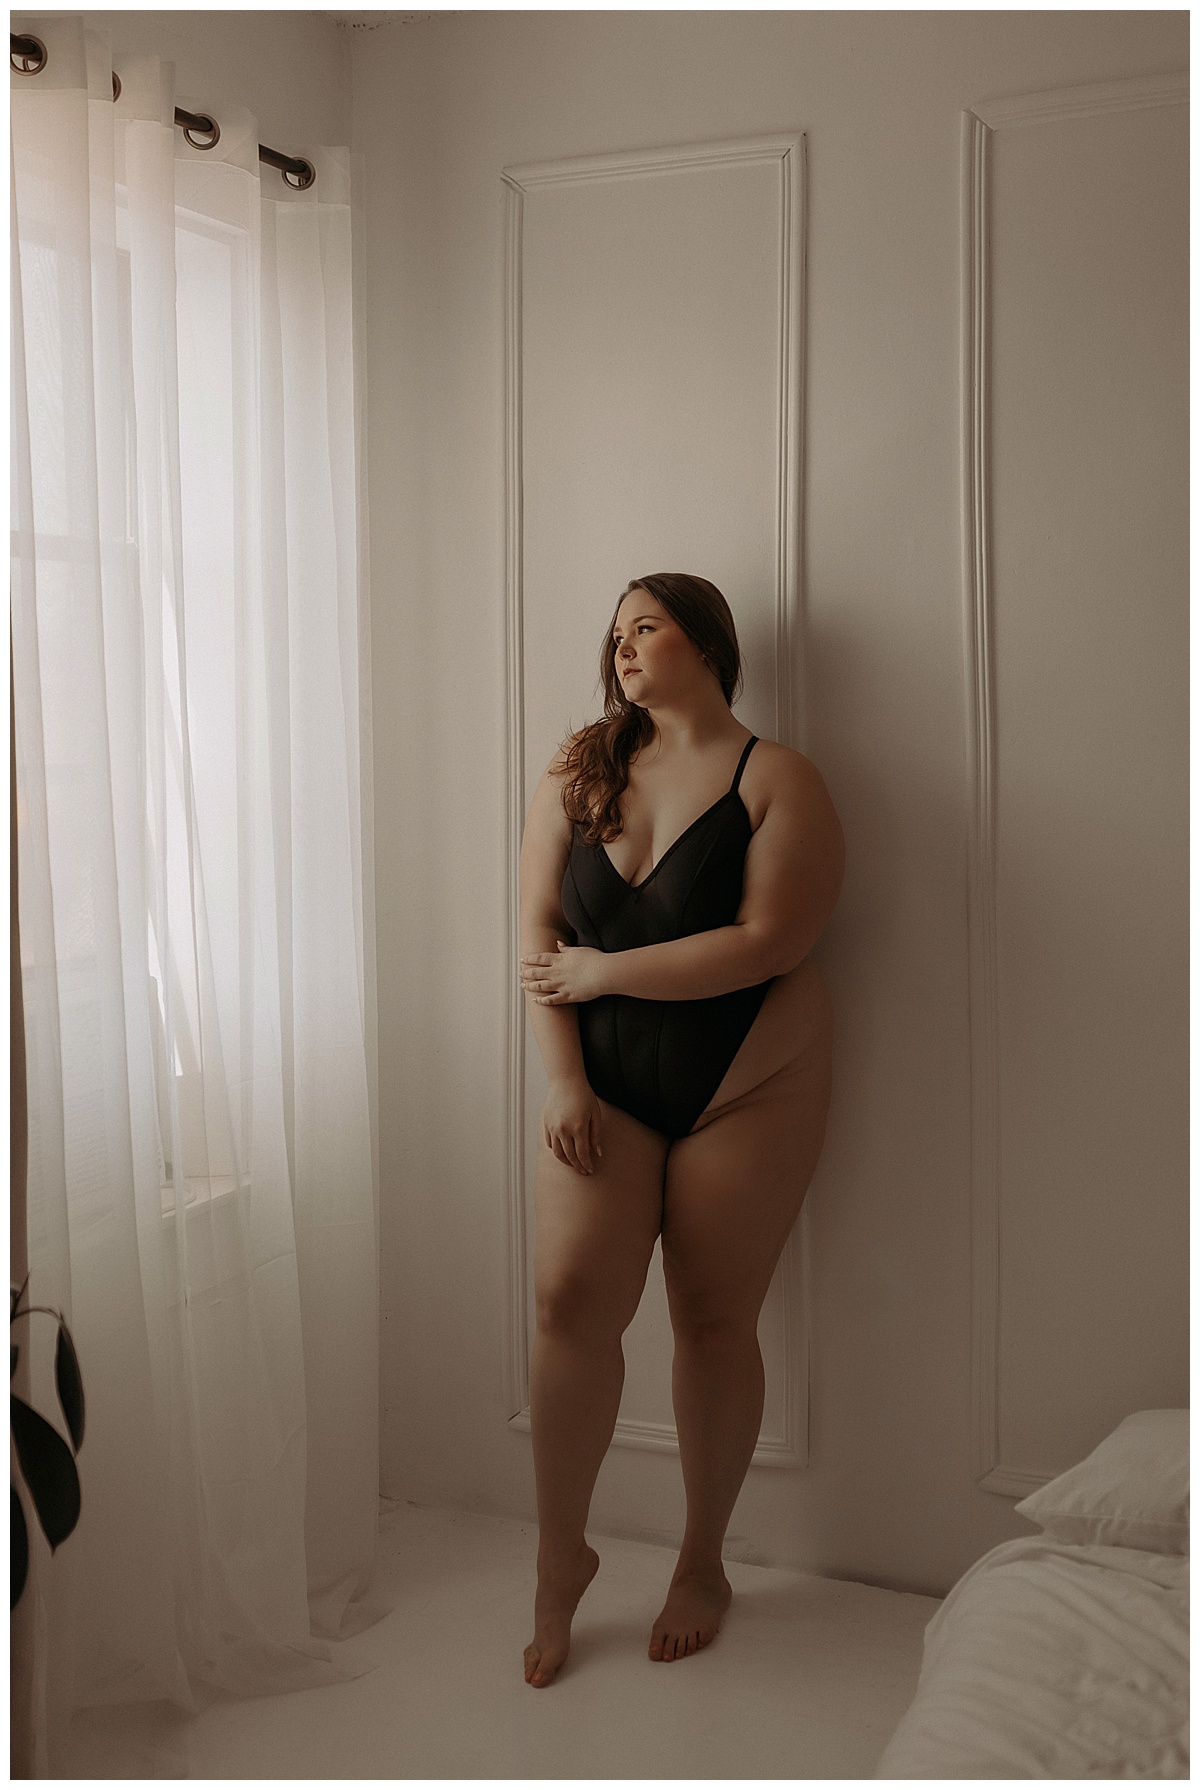 Adult leans against the wall wearing black lingerie for Mary Castillo Photography